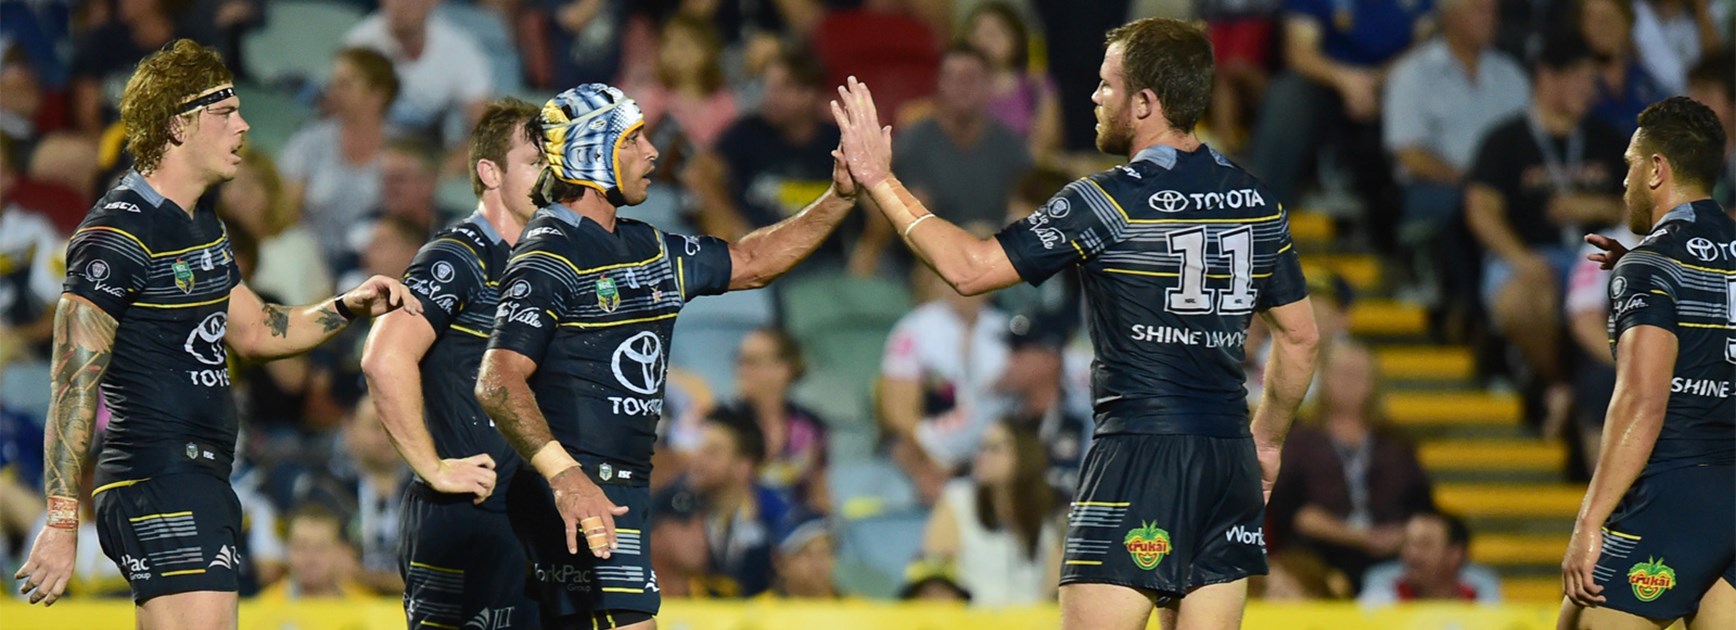 The Cowboys were at their impressive best against the Dragons on Saturday.